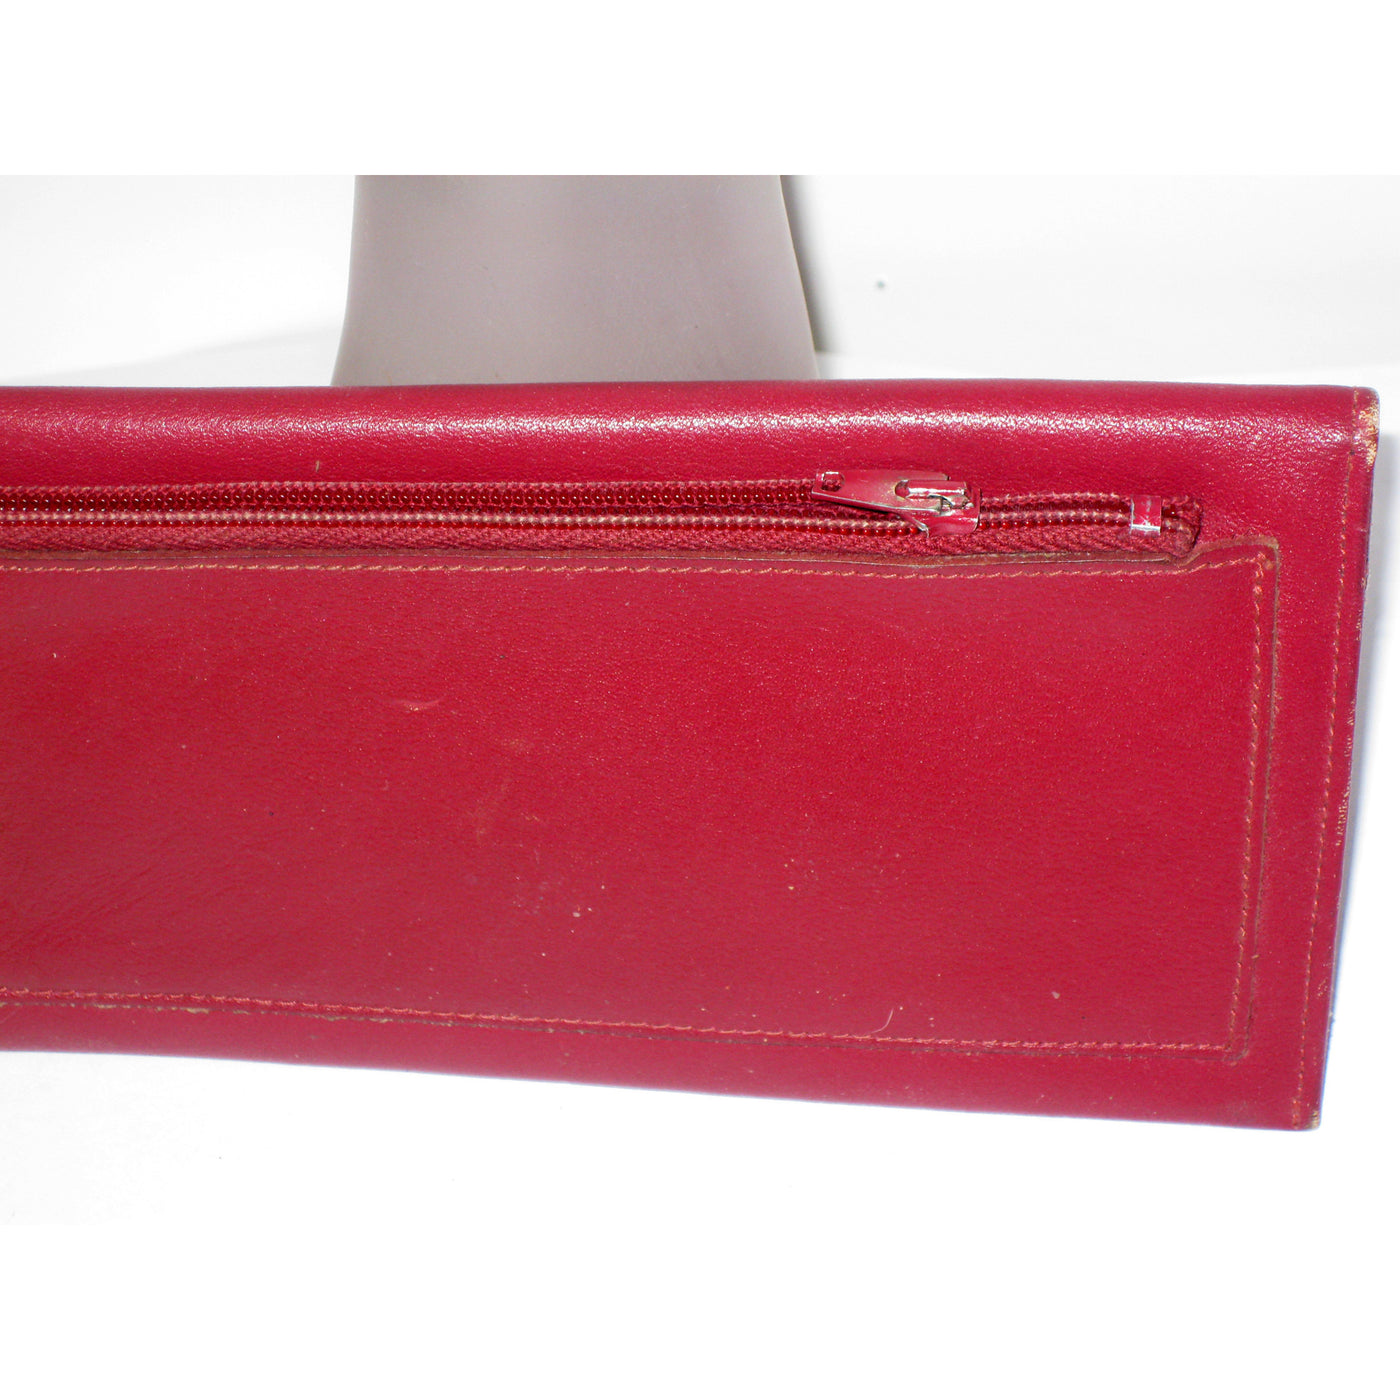 Vintage Red Leather Wallet By Bond Street Original – Quirky Finds